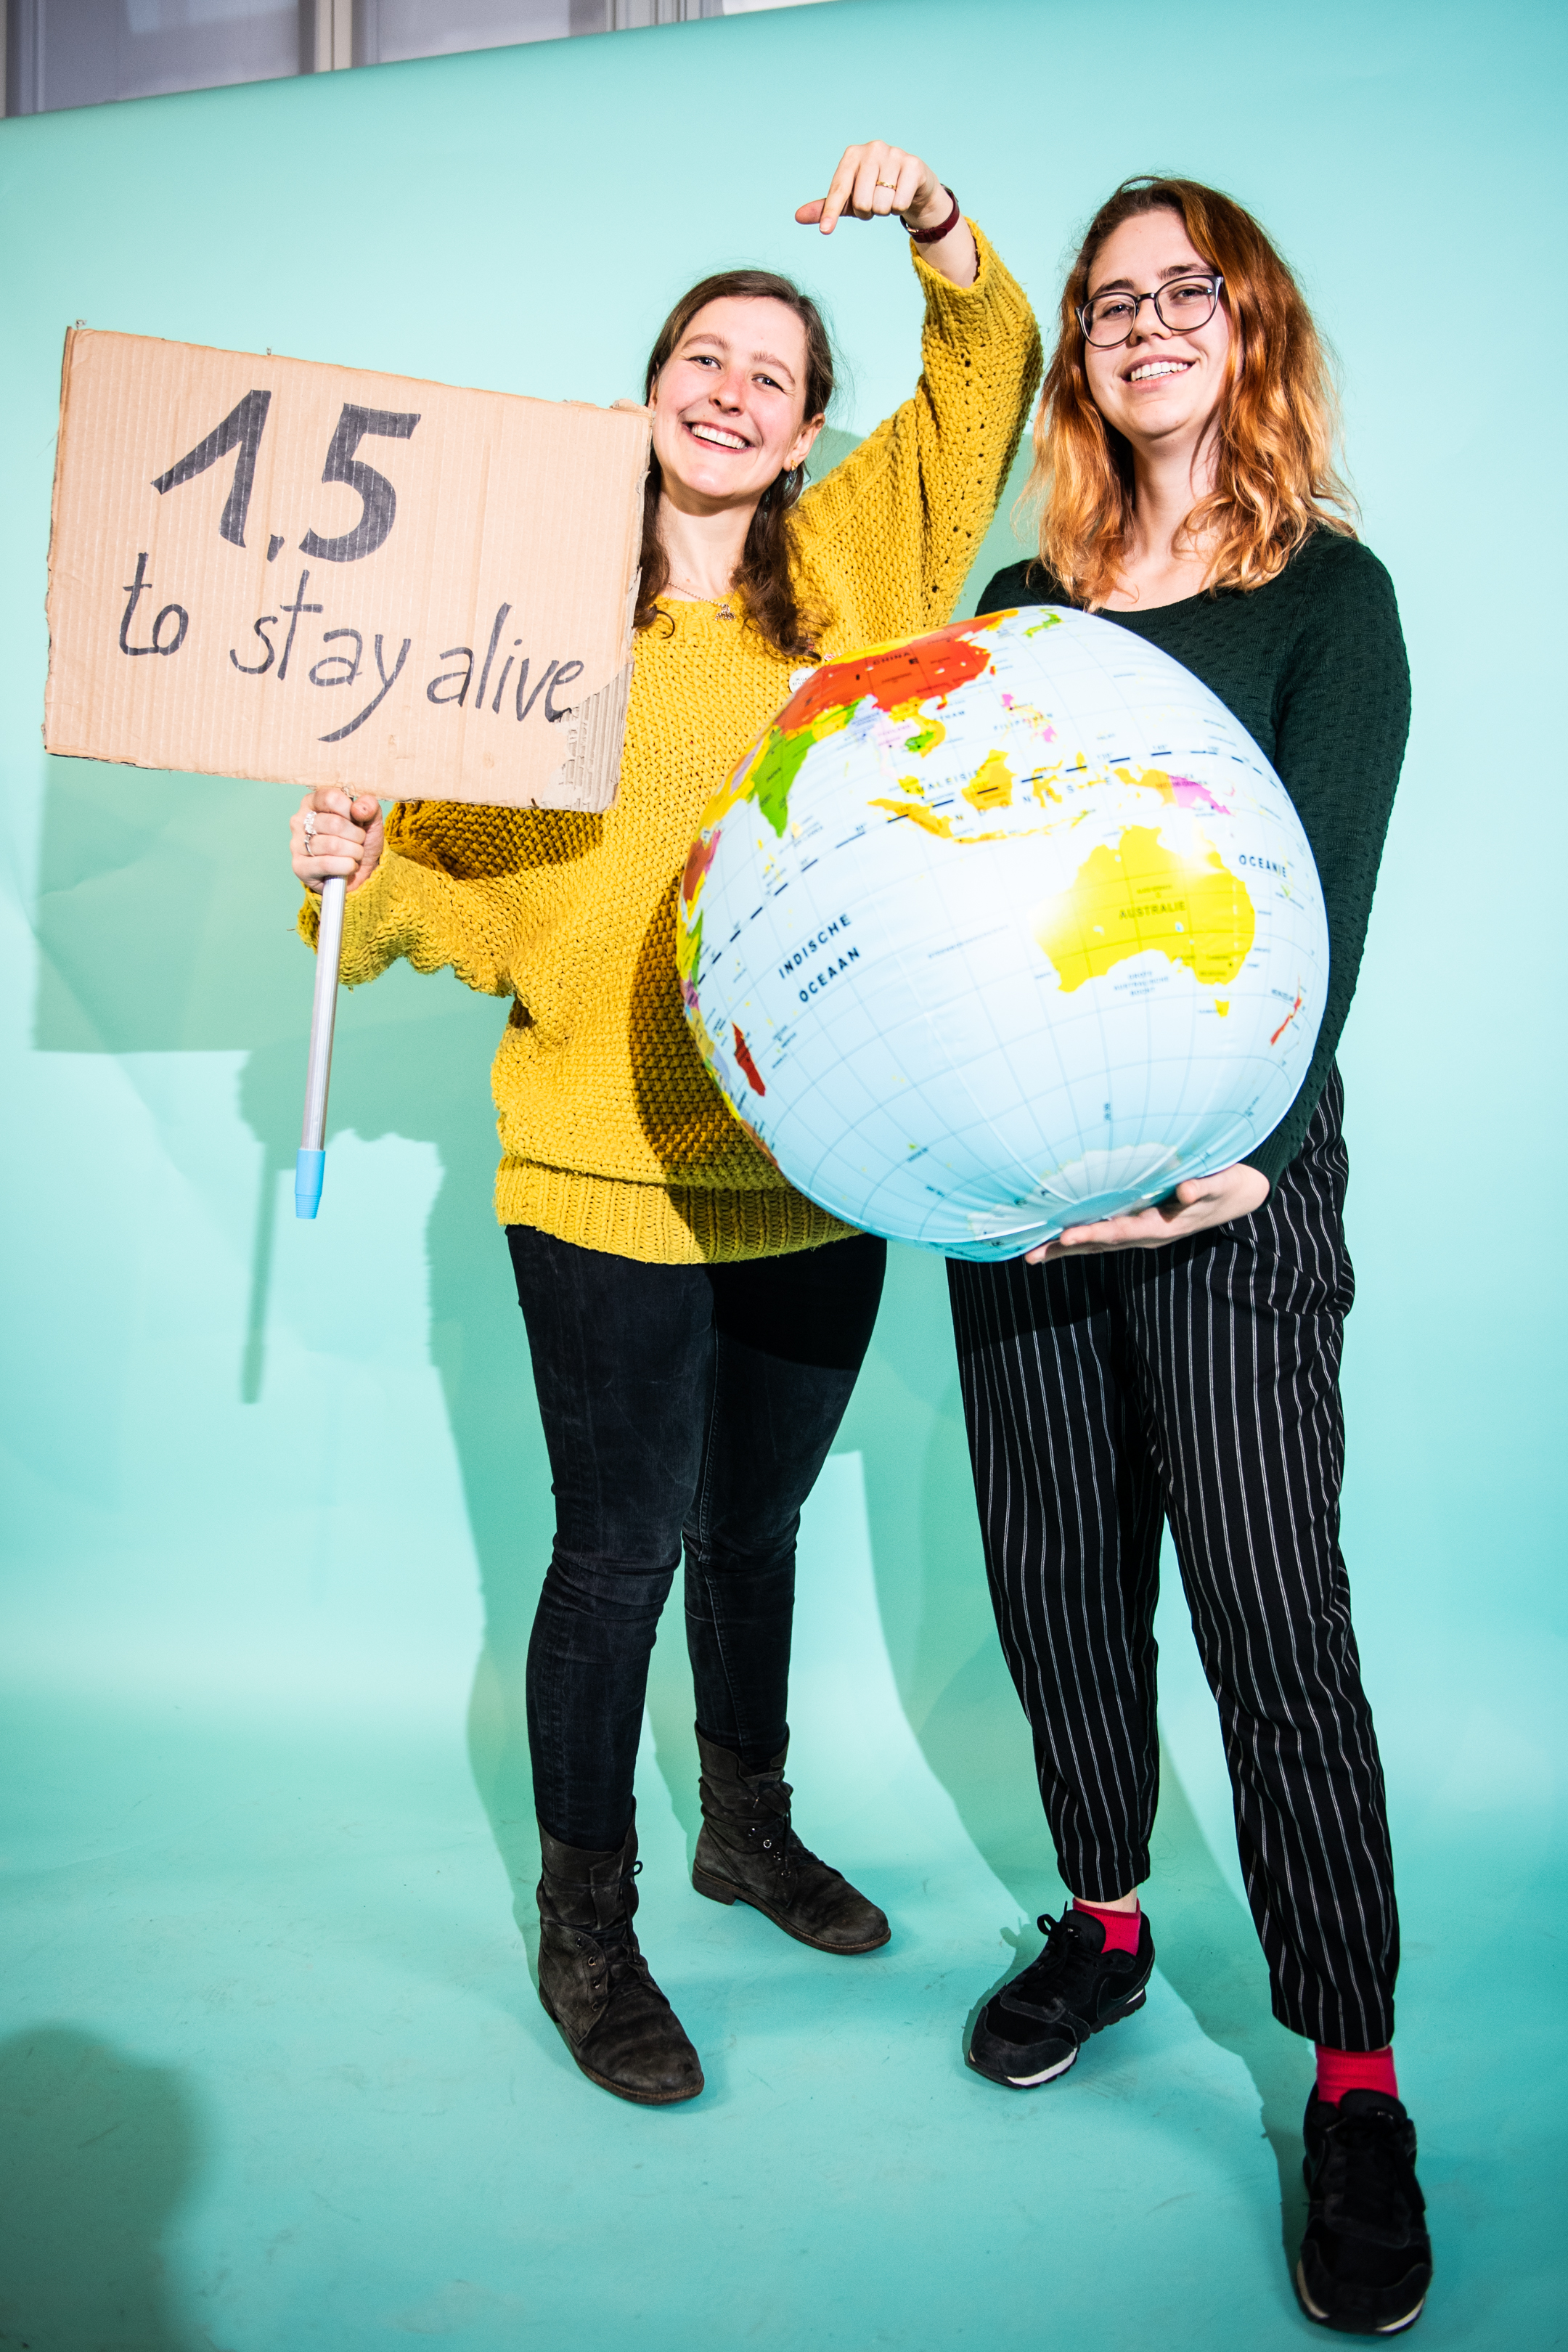 BRUSSELS, BELGIUM, On December 06, 2018.

Herlinde Baeyens And Nele Van Hoyweghen, The Two Girls From The Flemish Youth Council Who Go To The Climate Summit In Poland.

Pictured In Brussels, Belgium, On 06/12/2018. ( Photo By Mathieu Golinvaux / Photo News )







PICTURE NOT INCLUDED IN THE CONTRACT. 
! Only BELGIUM !